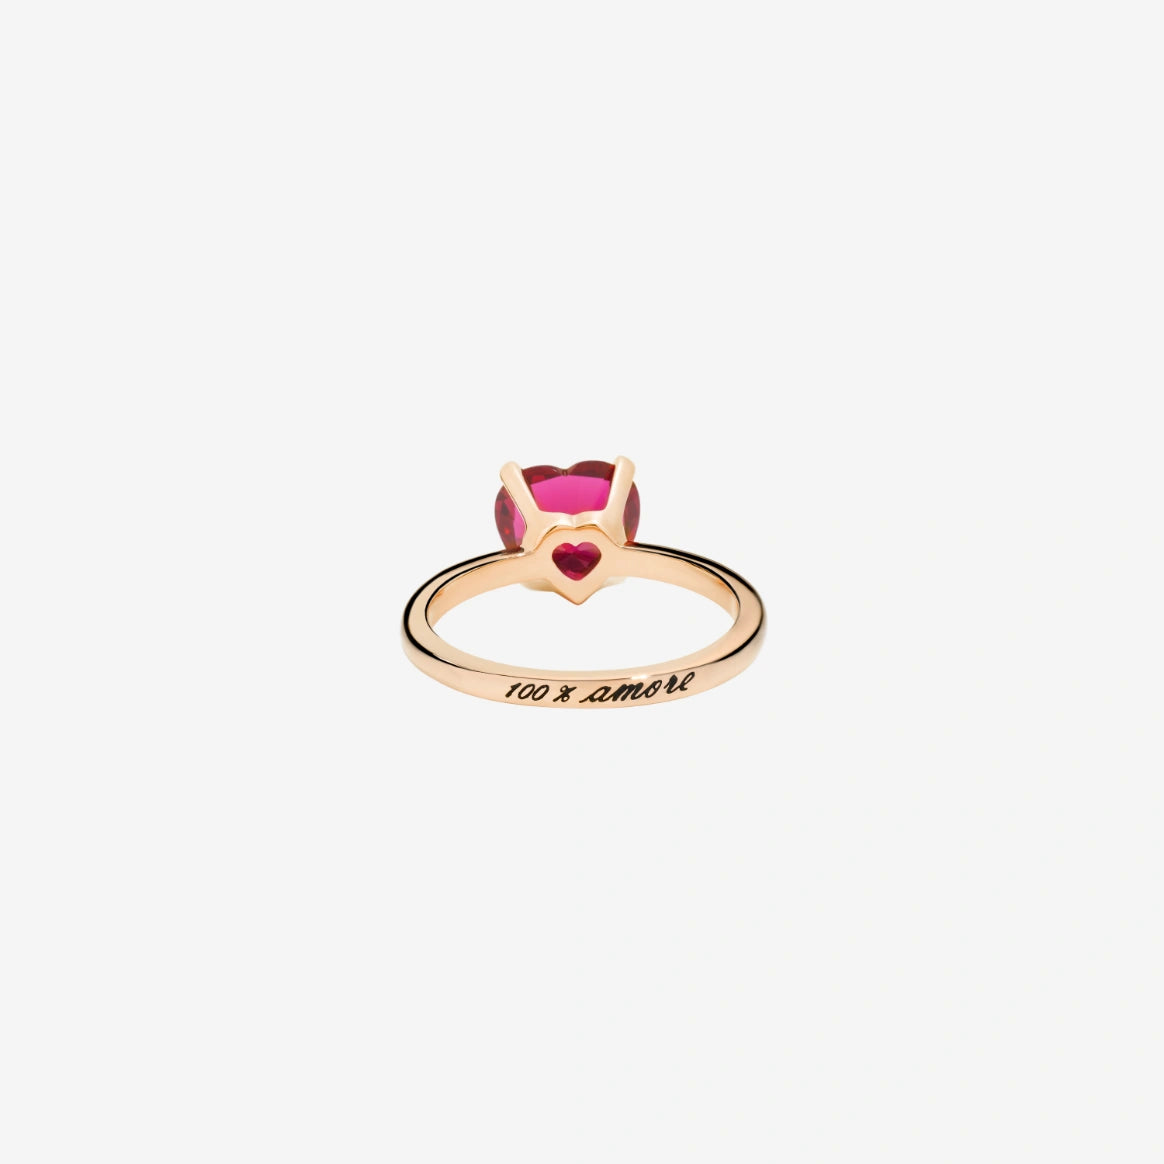 DoDo Heart Ring in 9K Rose Gold and Synthetic Ruby - Orsini Jewellers